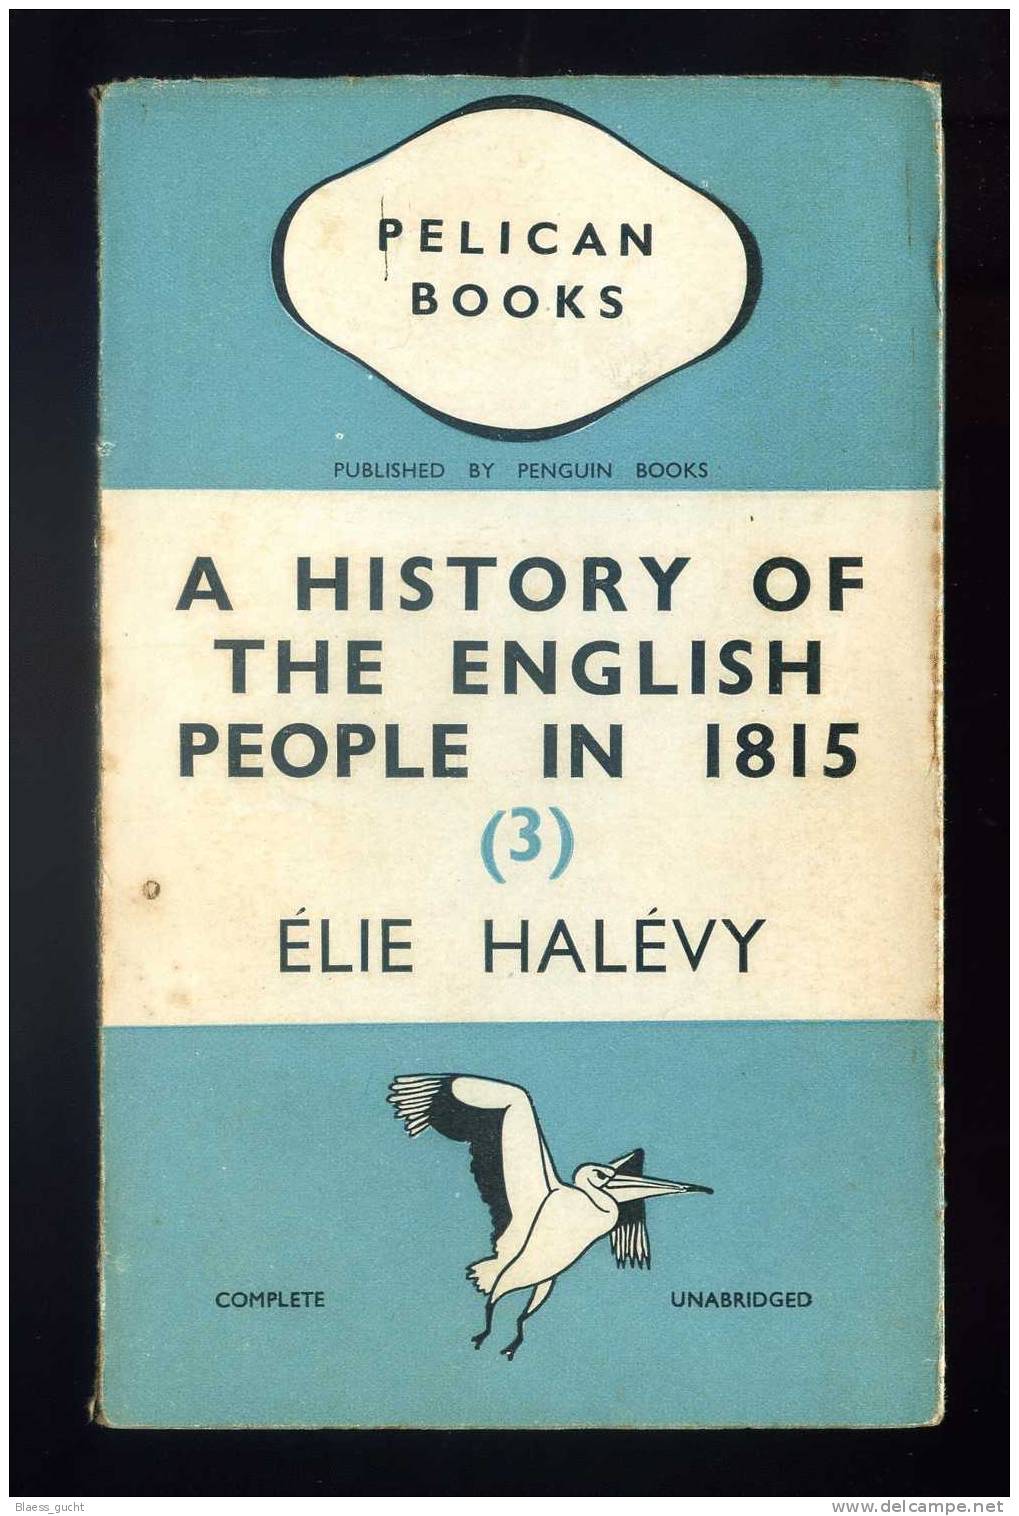 ELIE HALEVY  A HISTORY OF THE ENGLISH PEOPLE IN 1815  PELICAN BOOKS 1937 - Europe